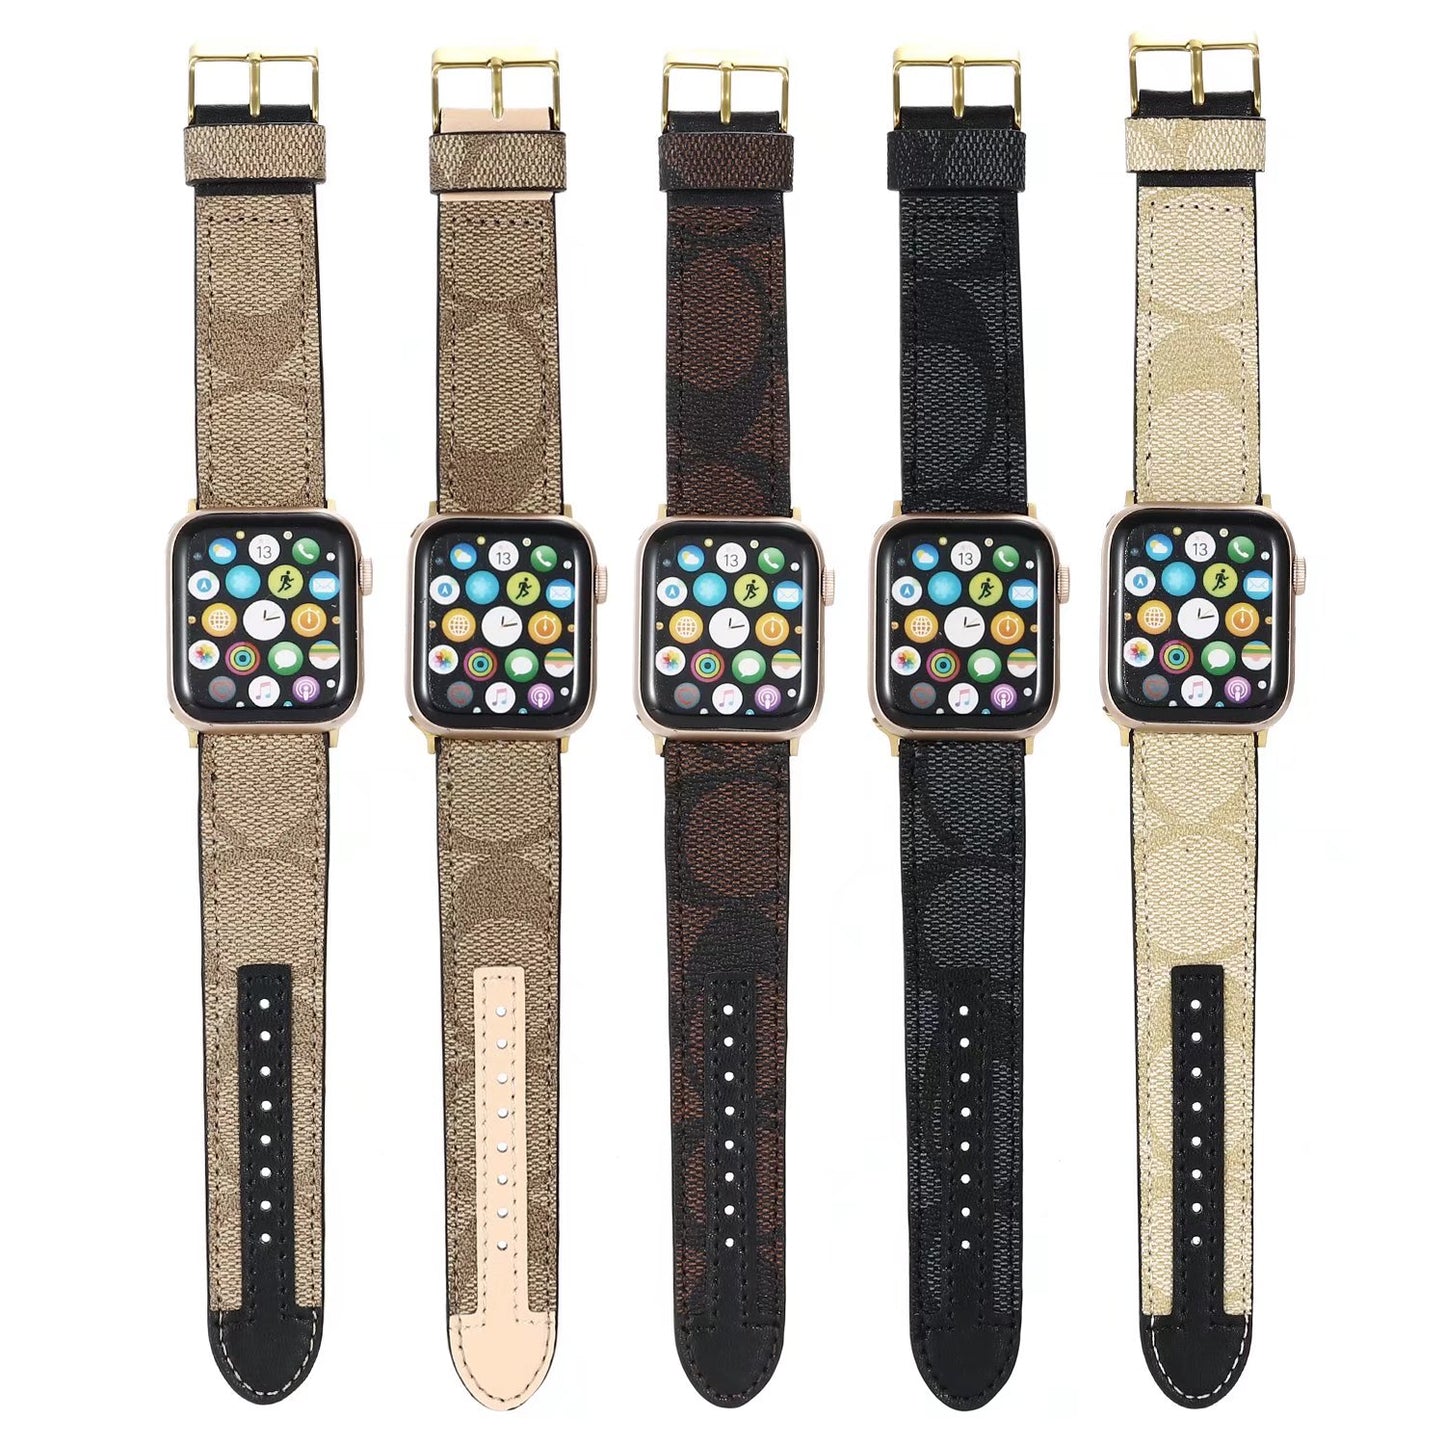 Watch Band Coach v2 in 5 colors